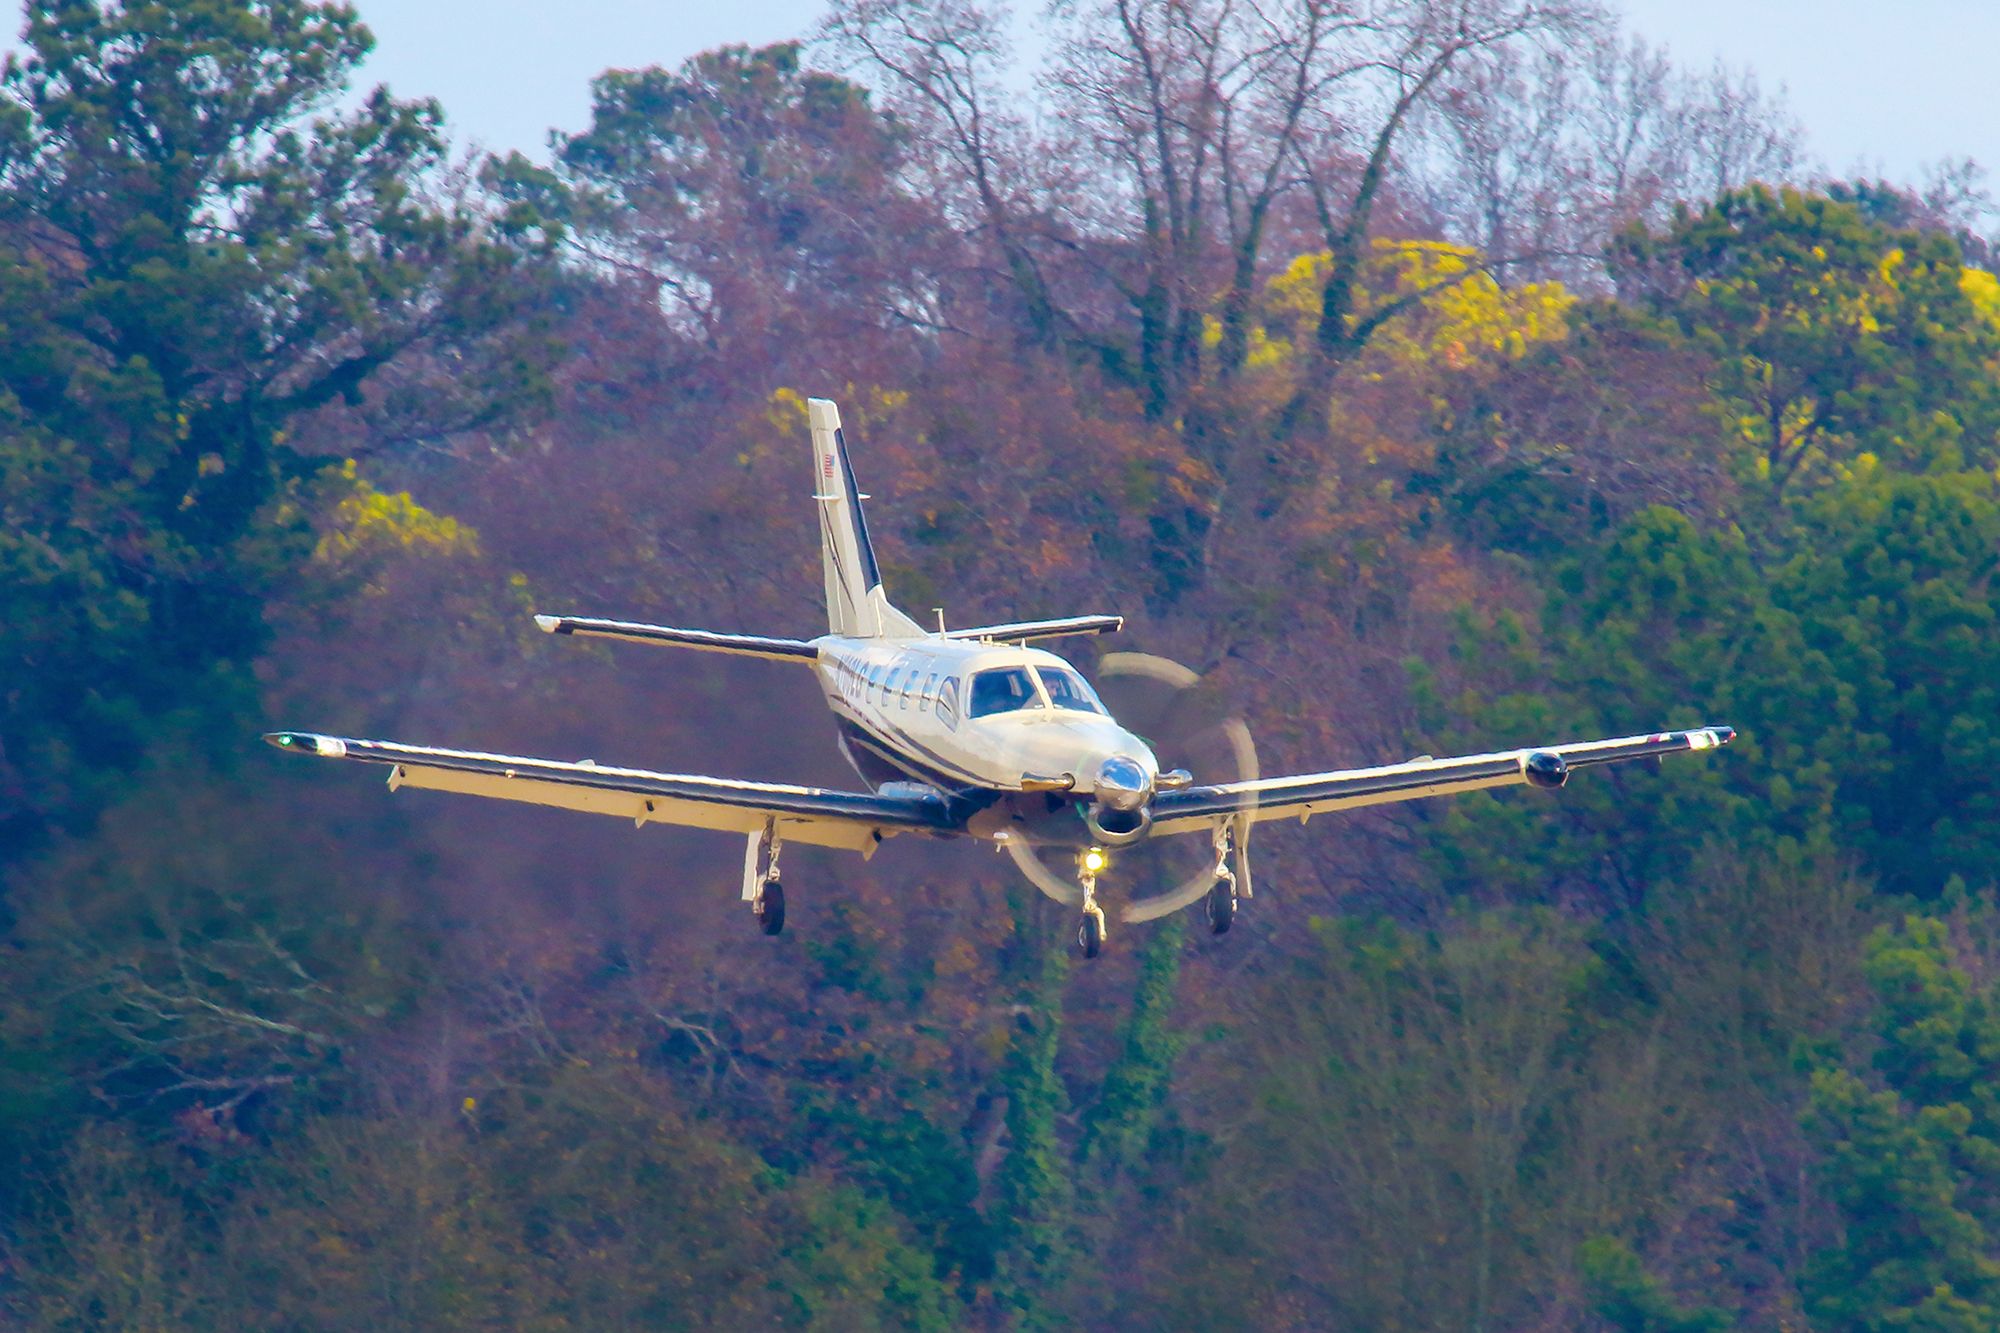 Socata TBM-700 (N700LG) - N700LG a 2003 Socata TBM 700 was in a nose down final approach for Atlanta's PDK executive airport. I shot this with my Canon 800mm lens. The camera settings were 1/250 shutter, F13 ISO 400. I really appreciate POSITIVE VOTES and POSITIVE COMMENTS. Please check out my other aircraft photography. Questions about this photo can be sent to Info@FlewShots.com